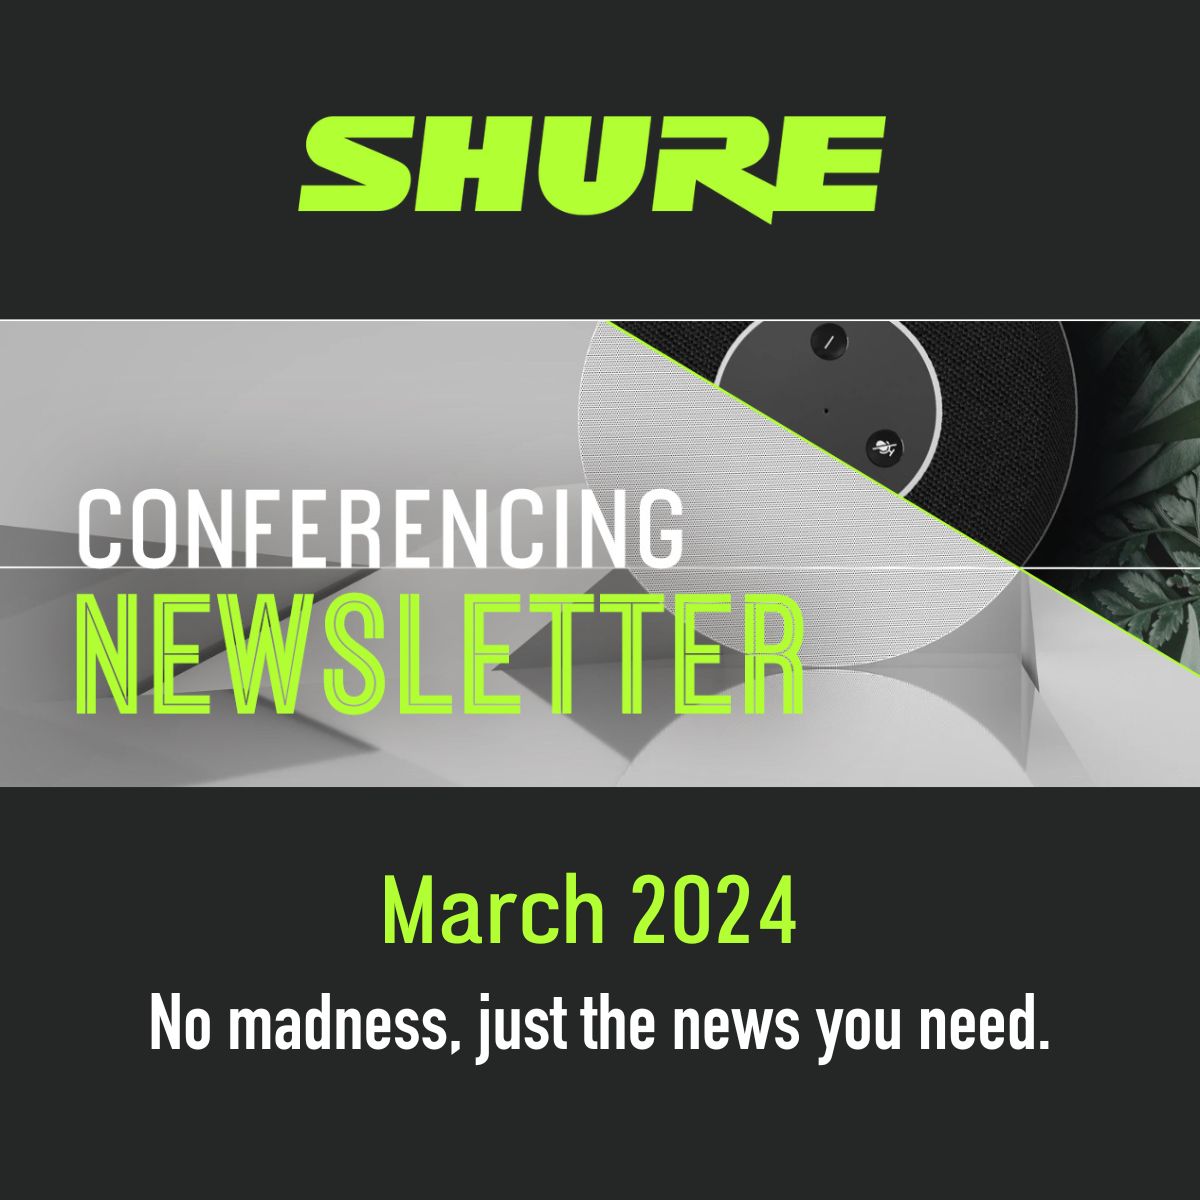 Product updates, industry insights, case studies, and more ...just about everything you'll need to get caught up on all things @Shure. Nav on over to is.gd/duWSWB for this month's issue. #shuresystems #proav #conferencing #audioequity #avexperts #wepowerperformance